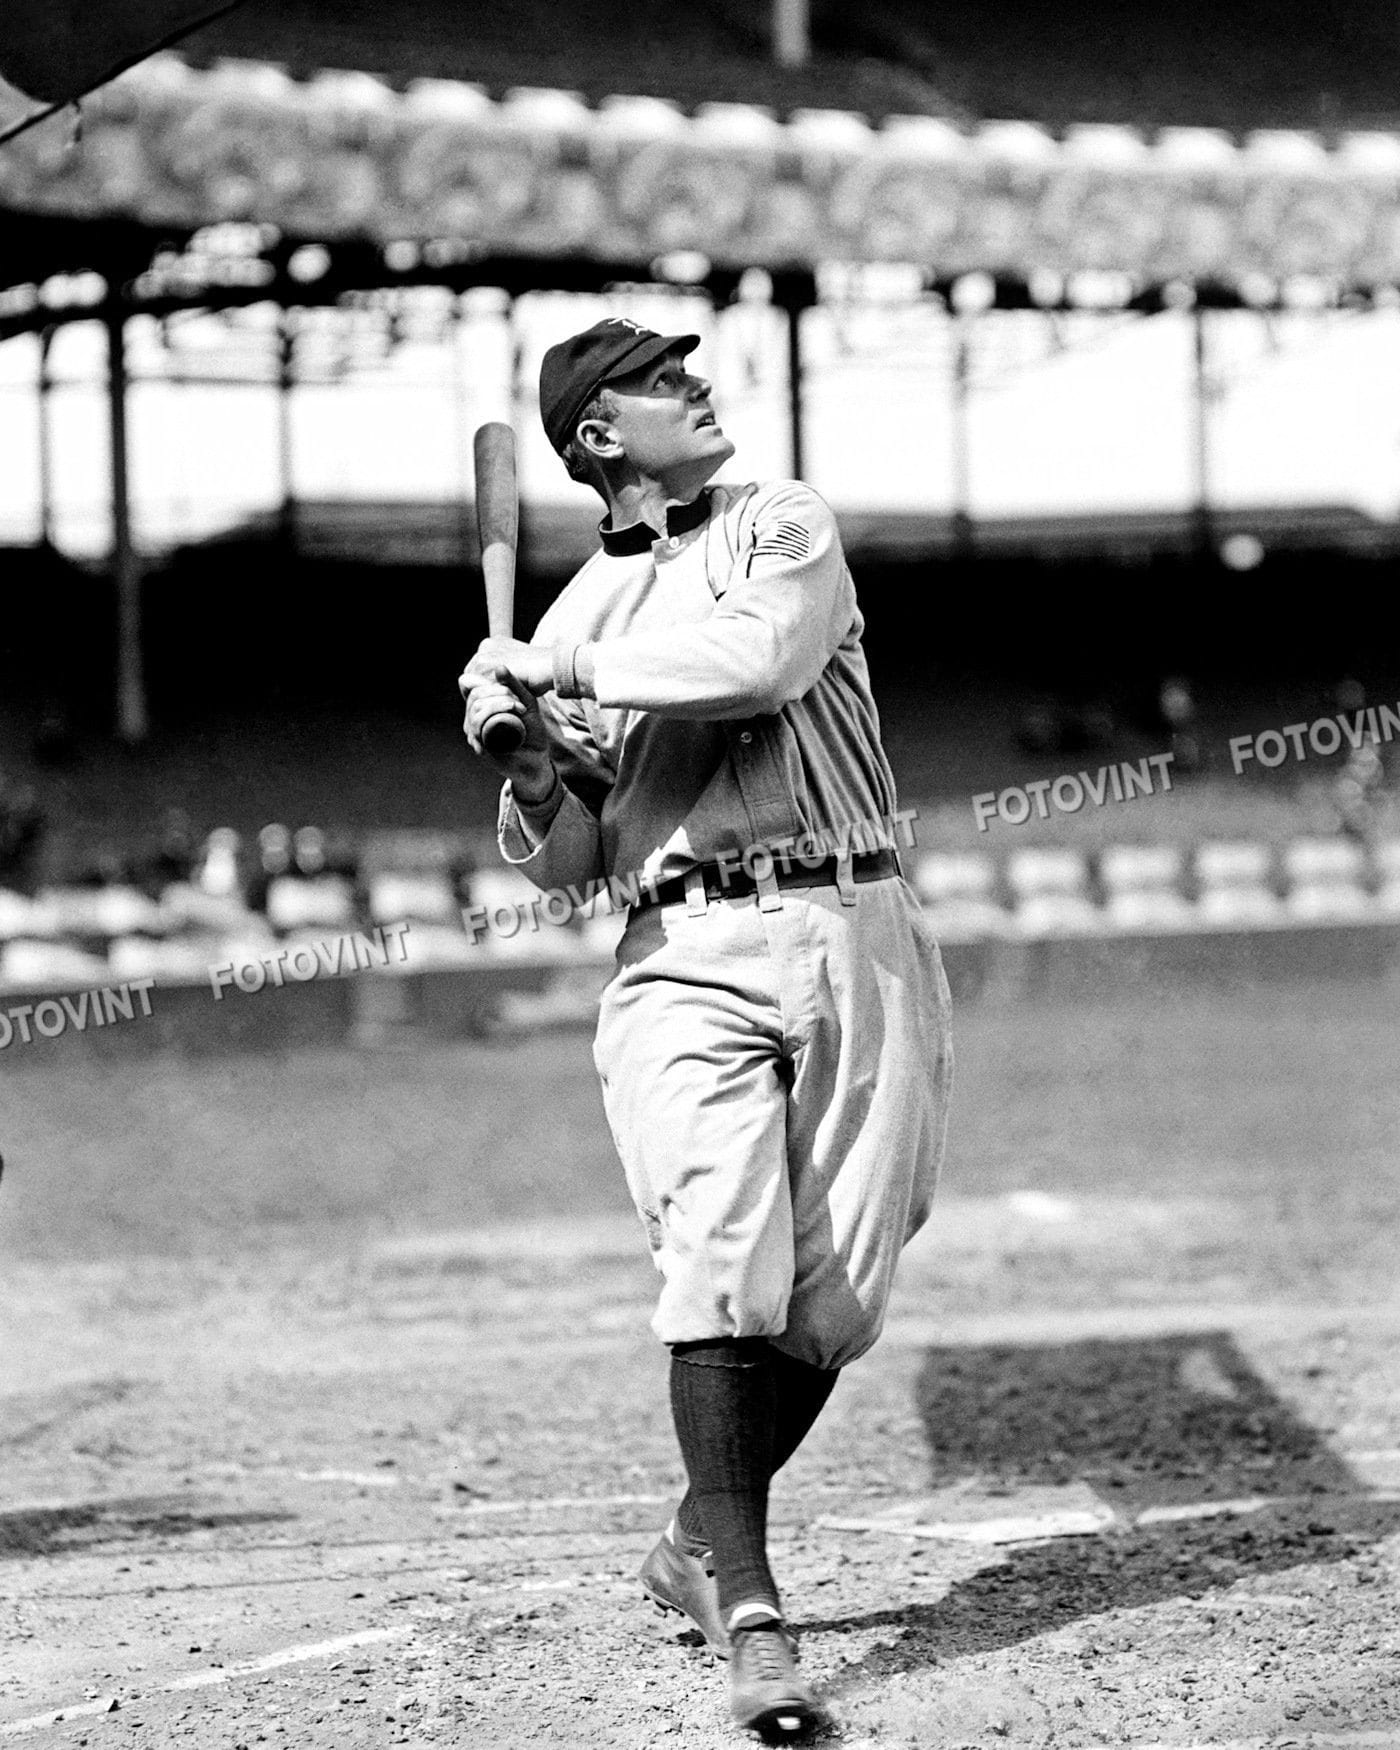 AWESOME TY COBB TIGERS photo 8x10 ALL TIME GREAT BASEBALL LEGEND